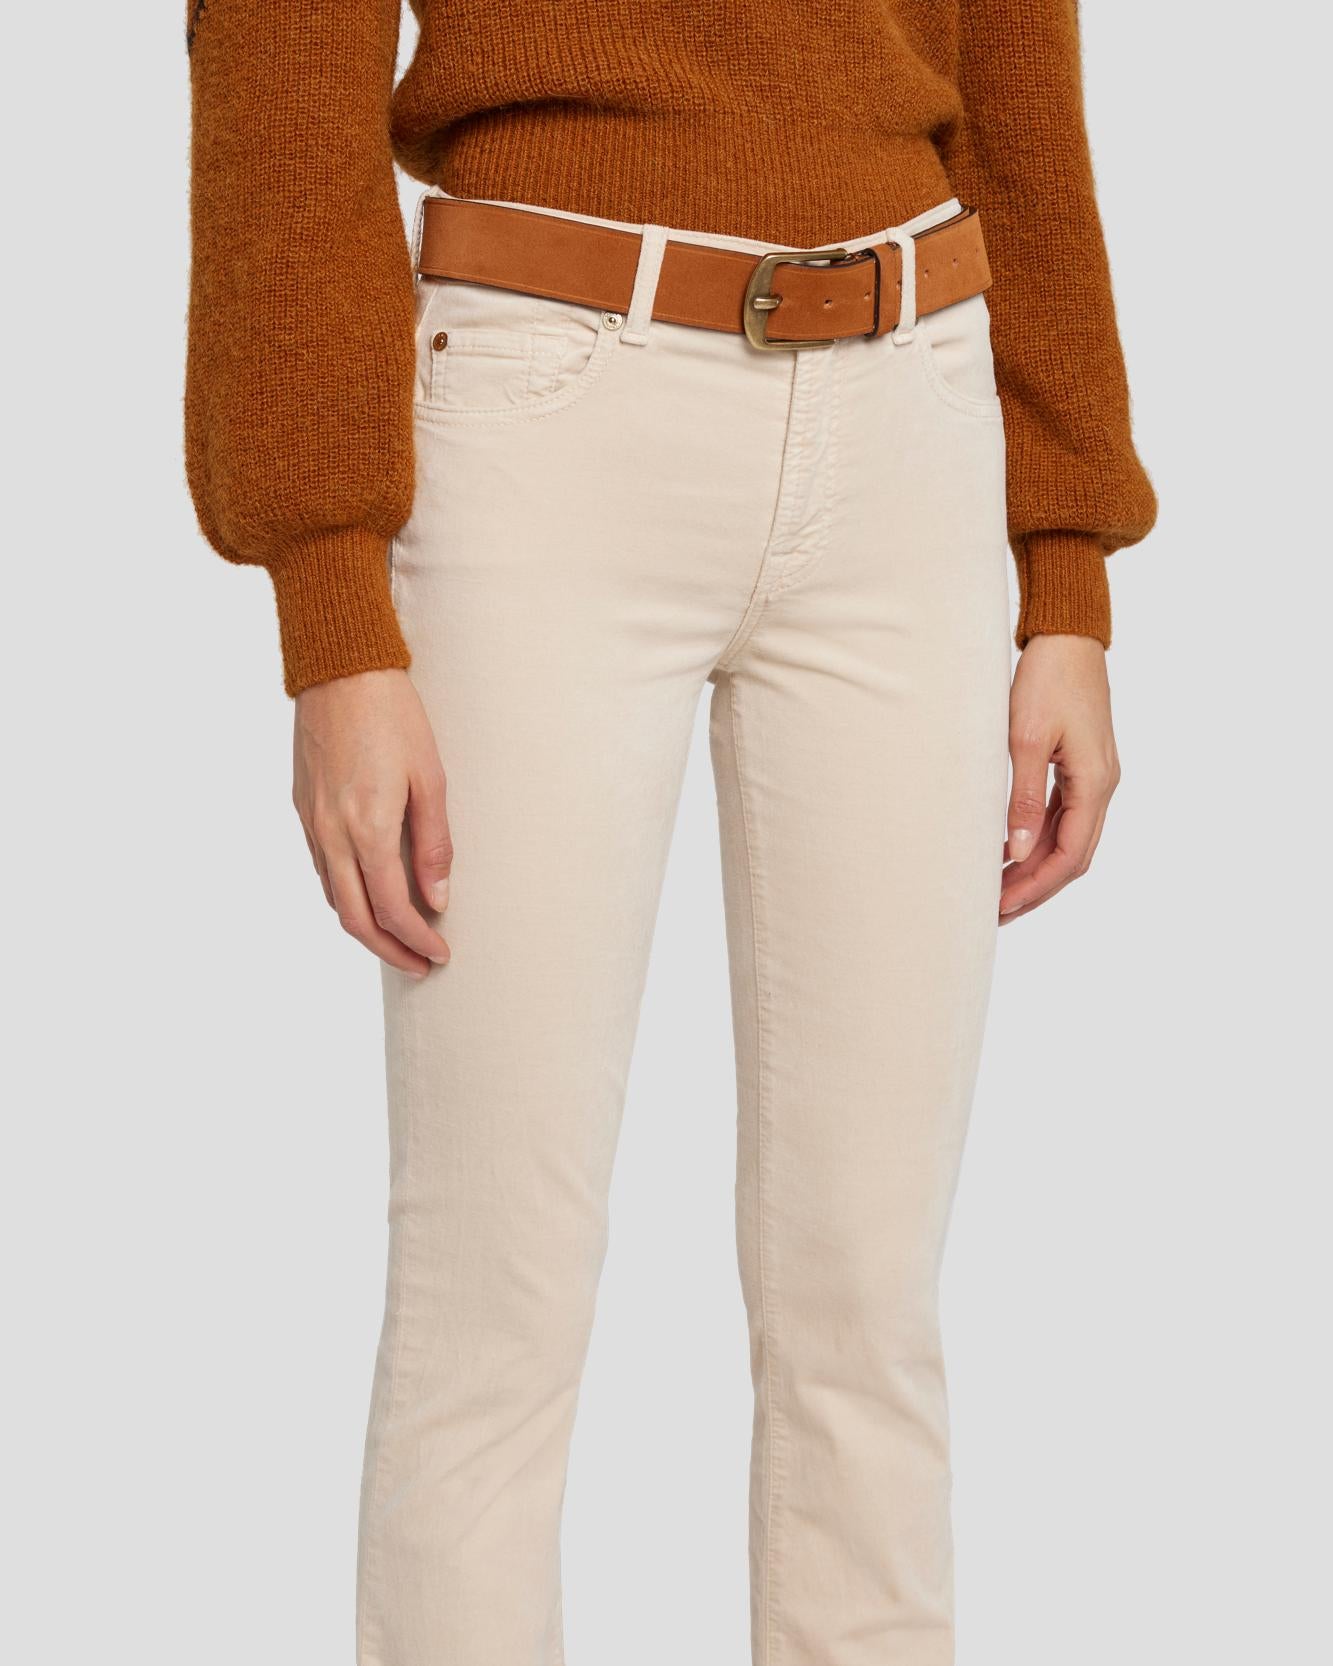 7 For All Mankind Classic Suede Belt in Cognac 7A655638COG